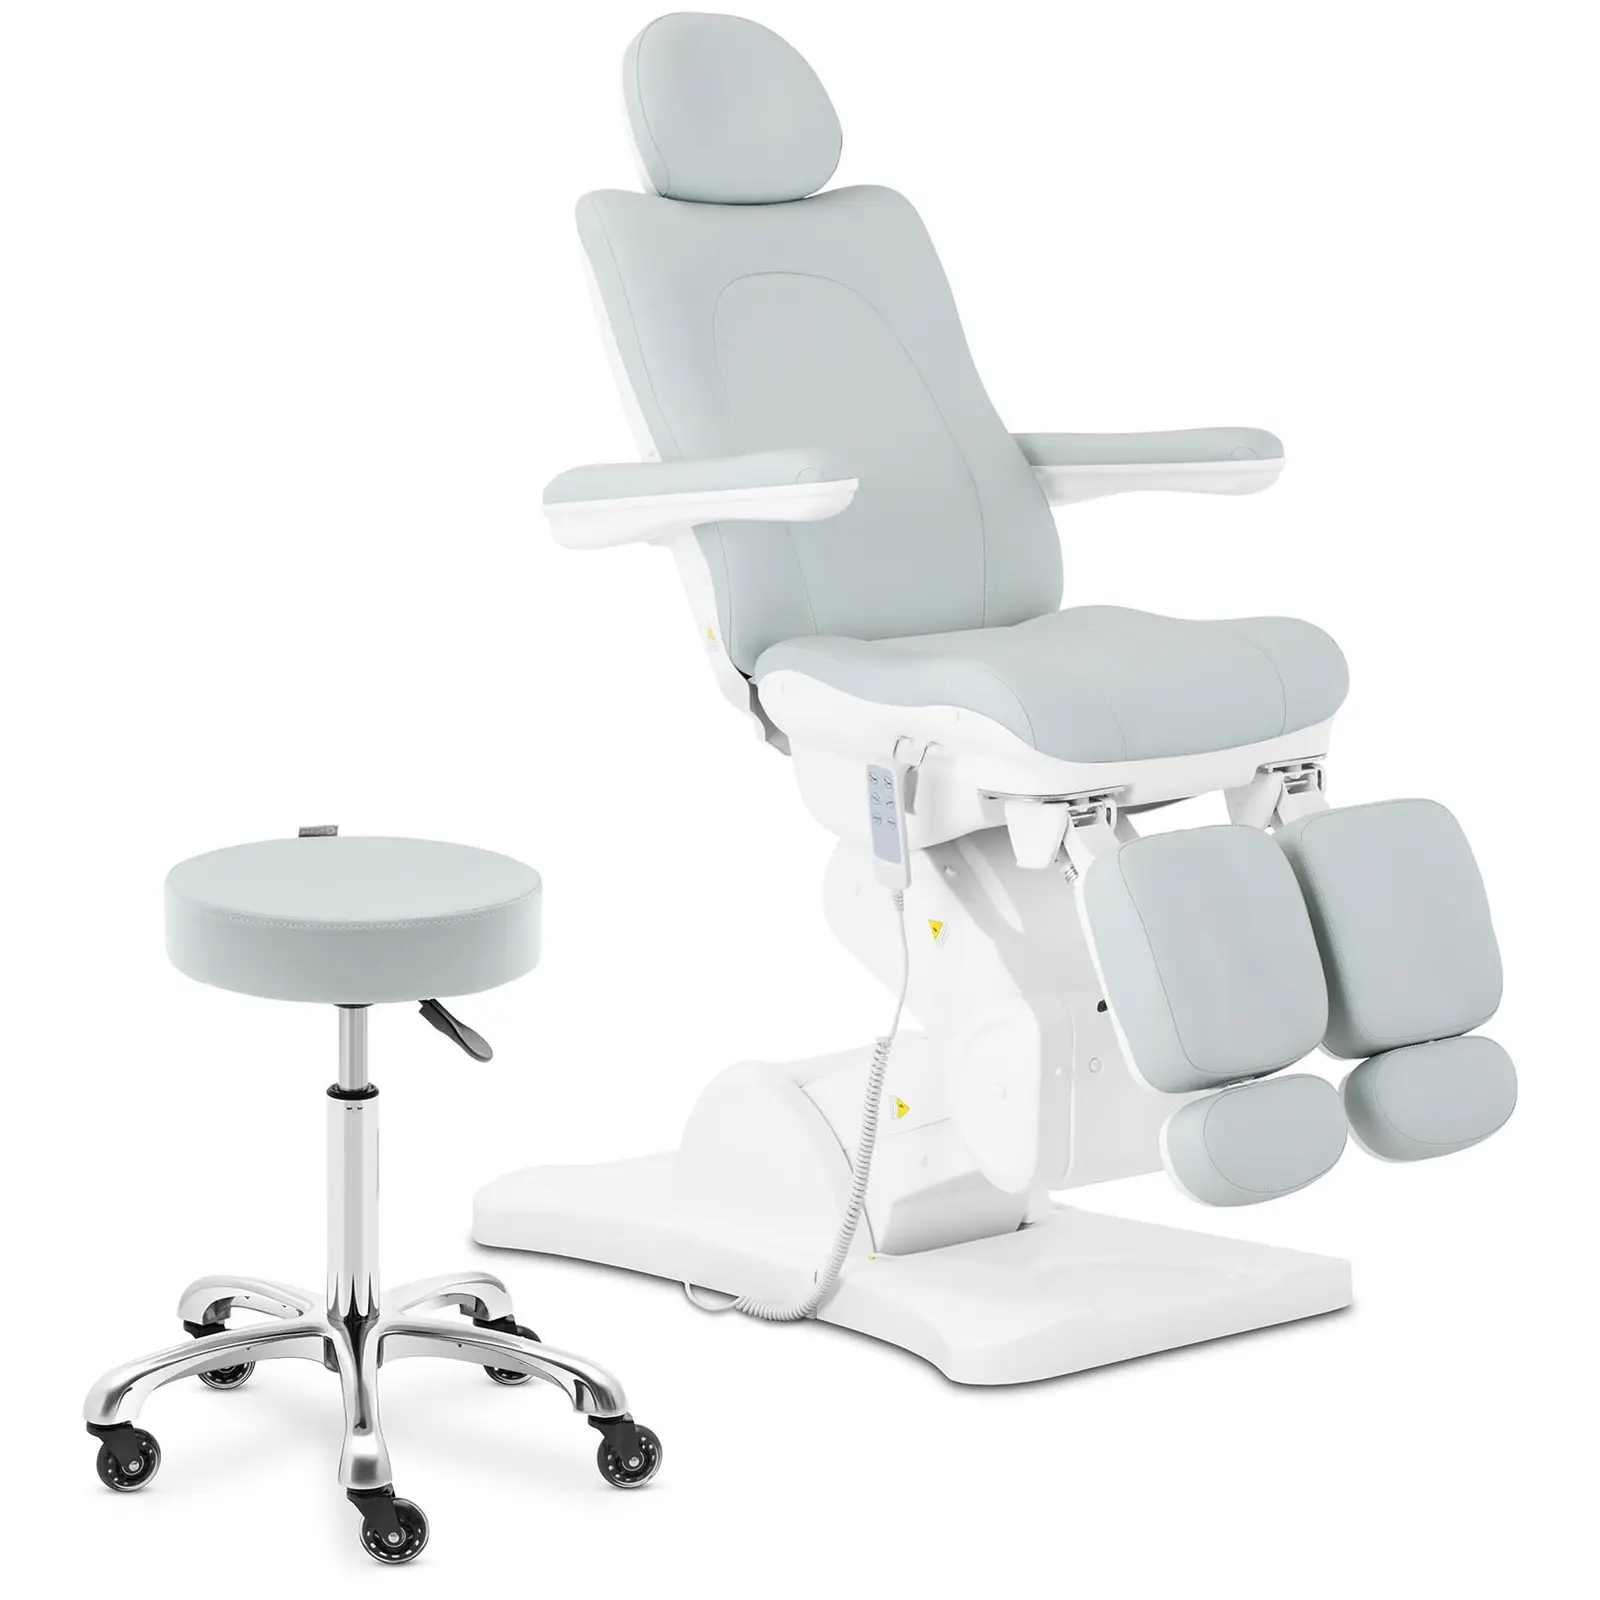 Pedicure chair with rolling stool - pistachio